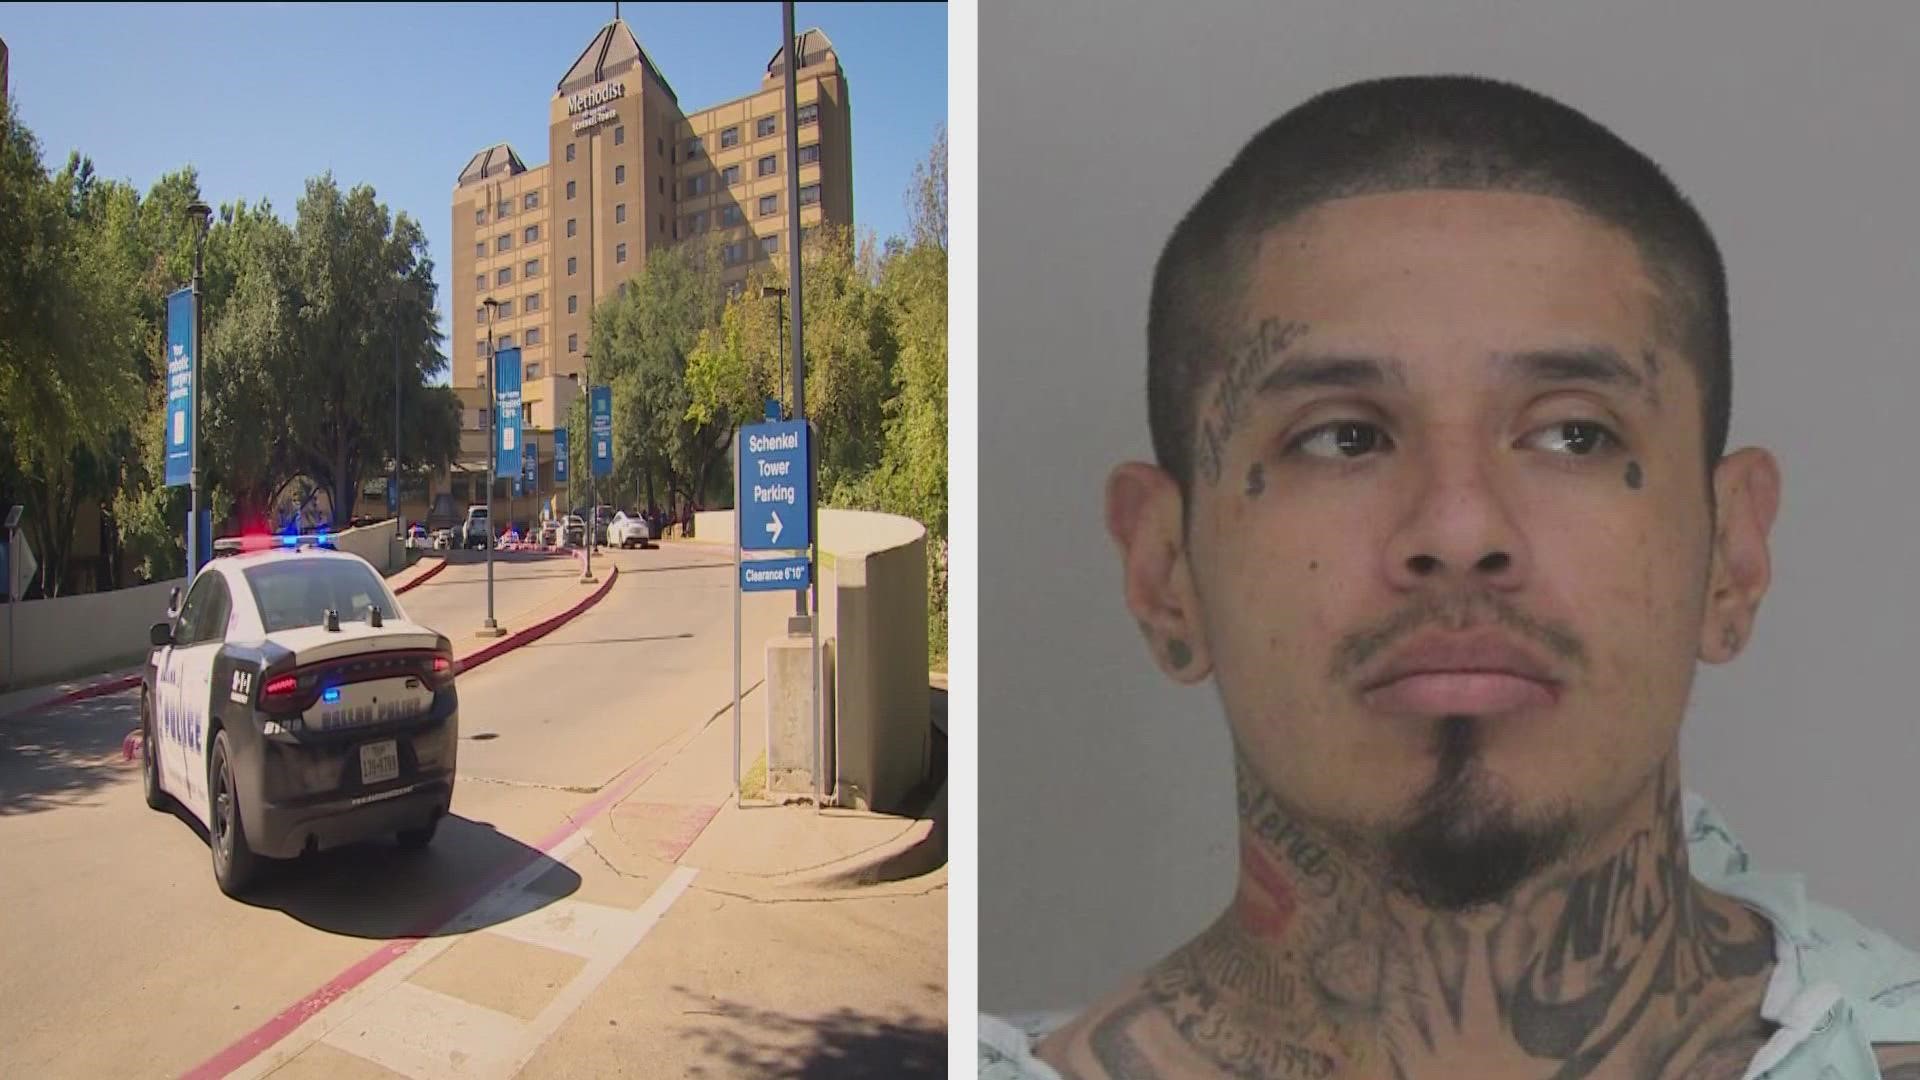 The Dallas Bureau of Alcohol, Tobacco, Firearms and Explosives is investigating how the suspect was able to obtain a firearm as both a felon and parolee.